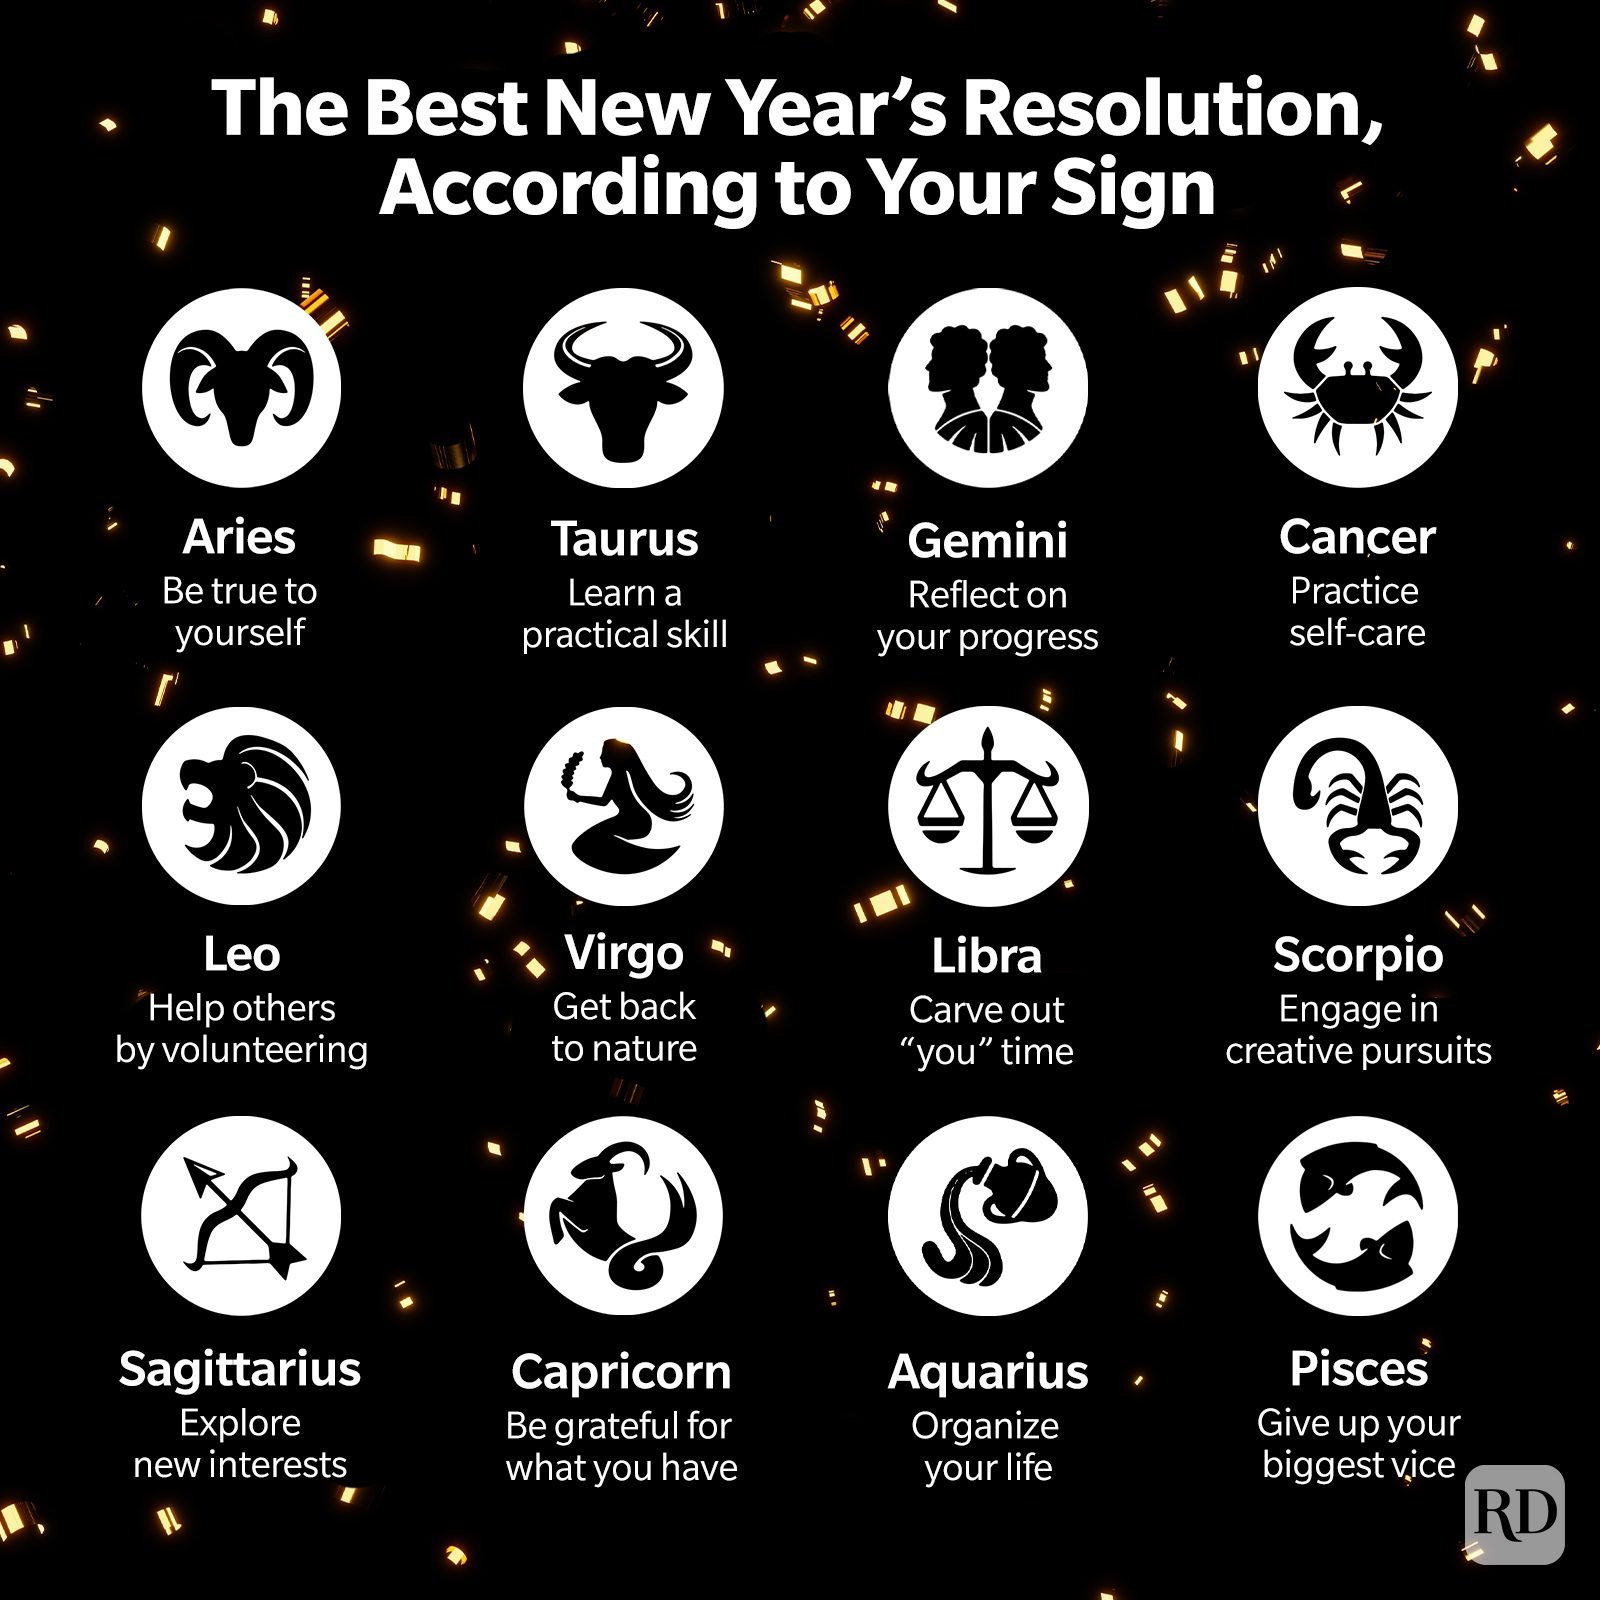 The Best New Year's Resolution for 2022, According to Your Zodiac Sign